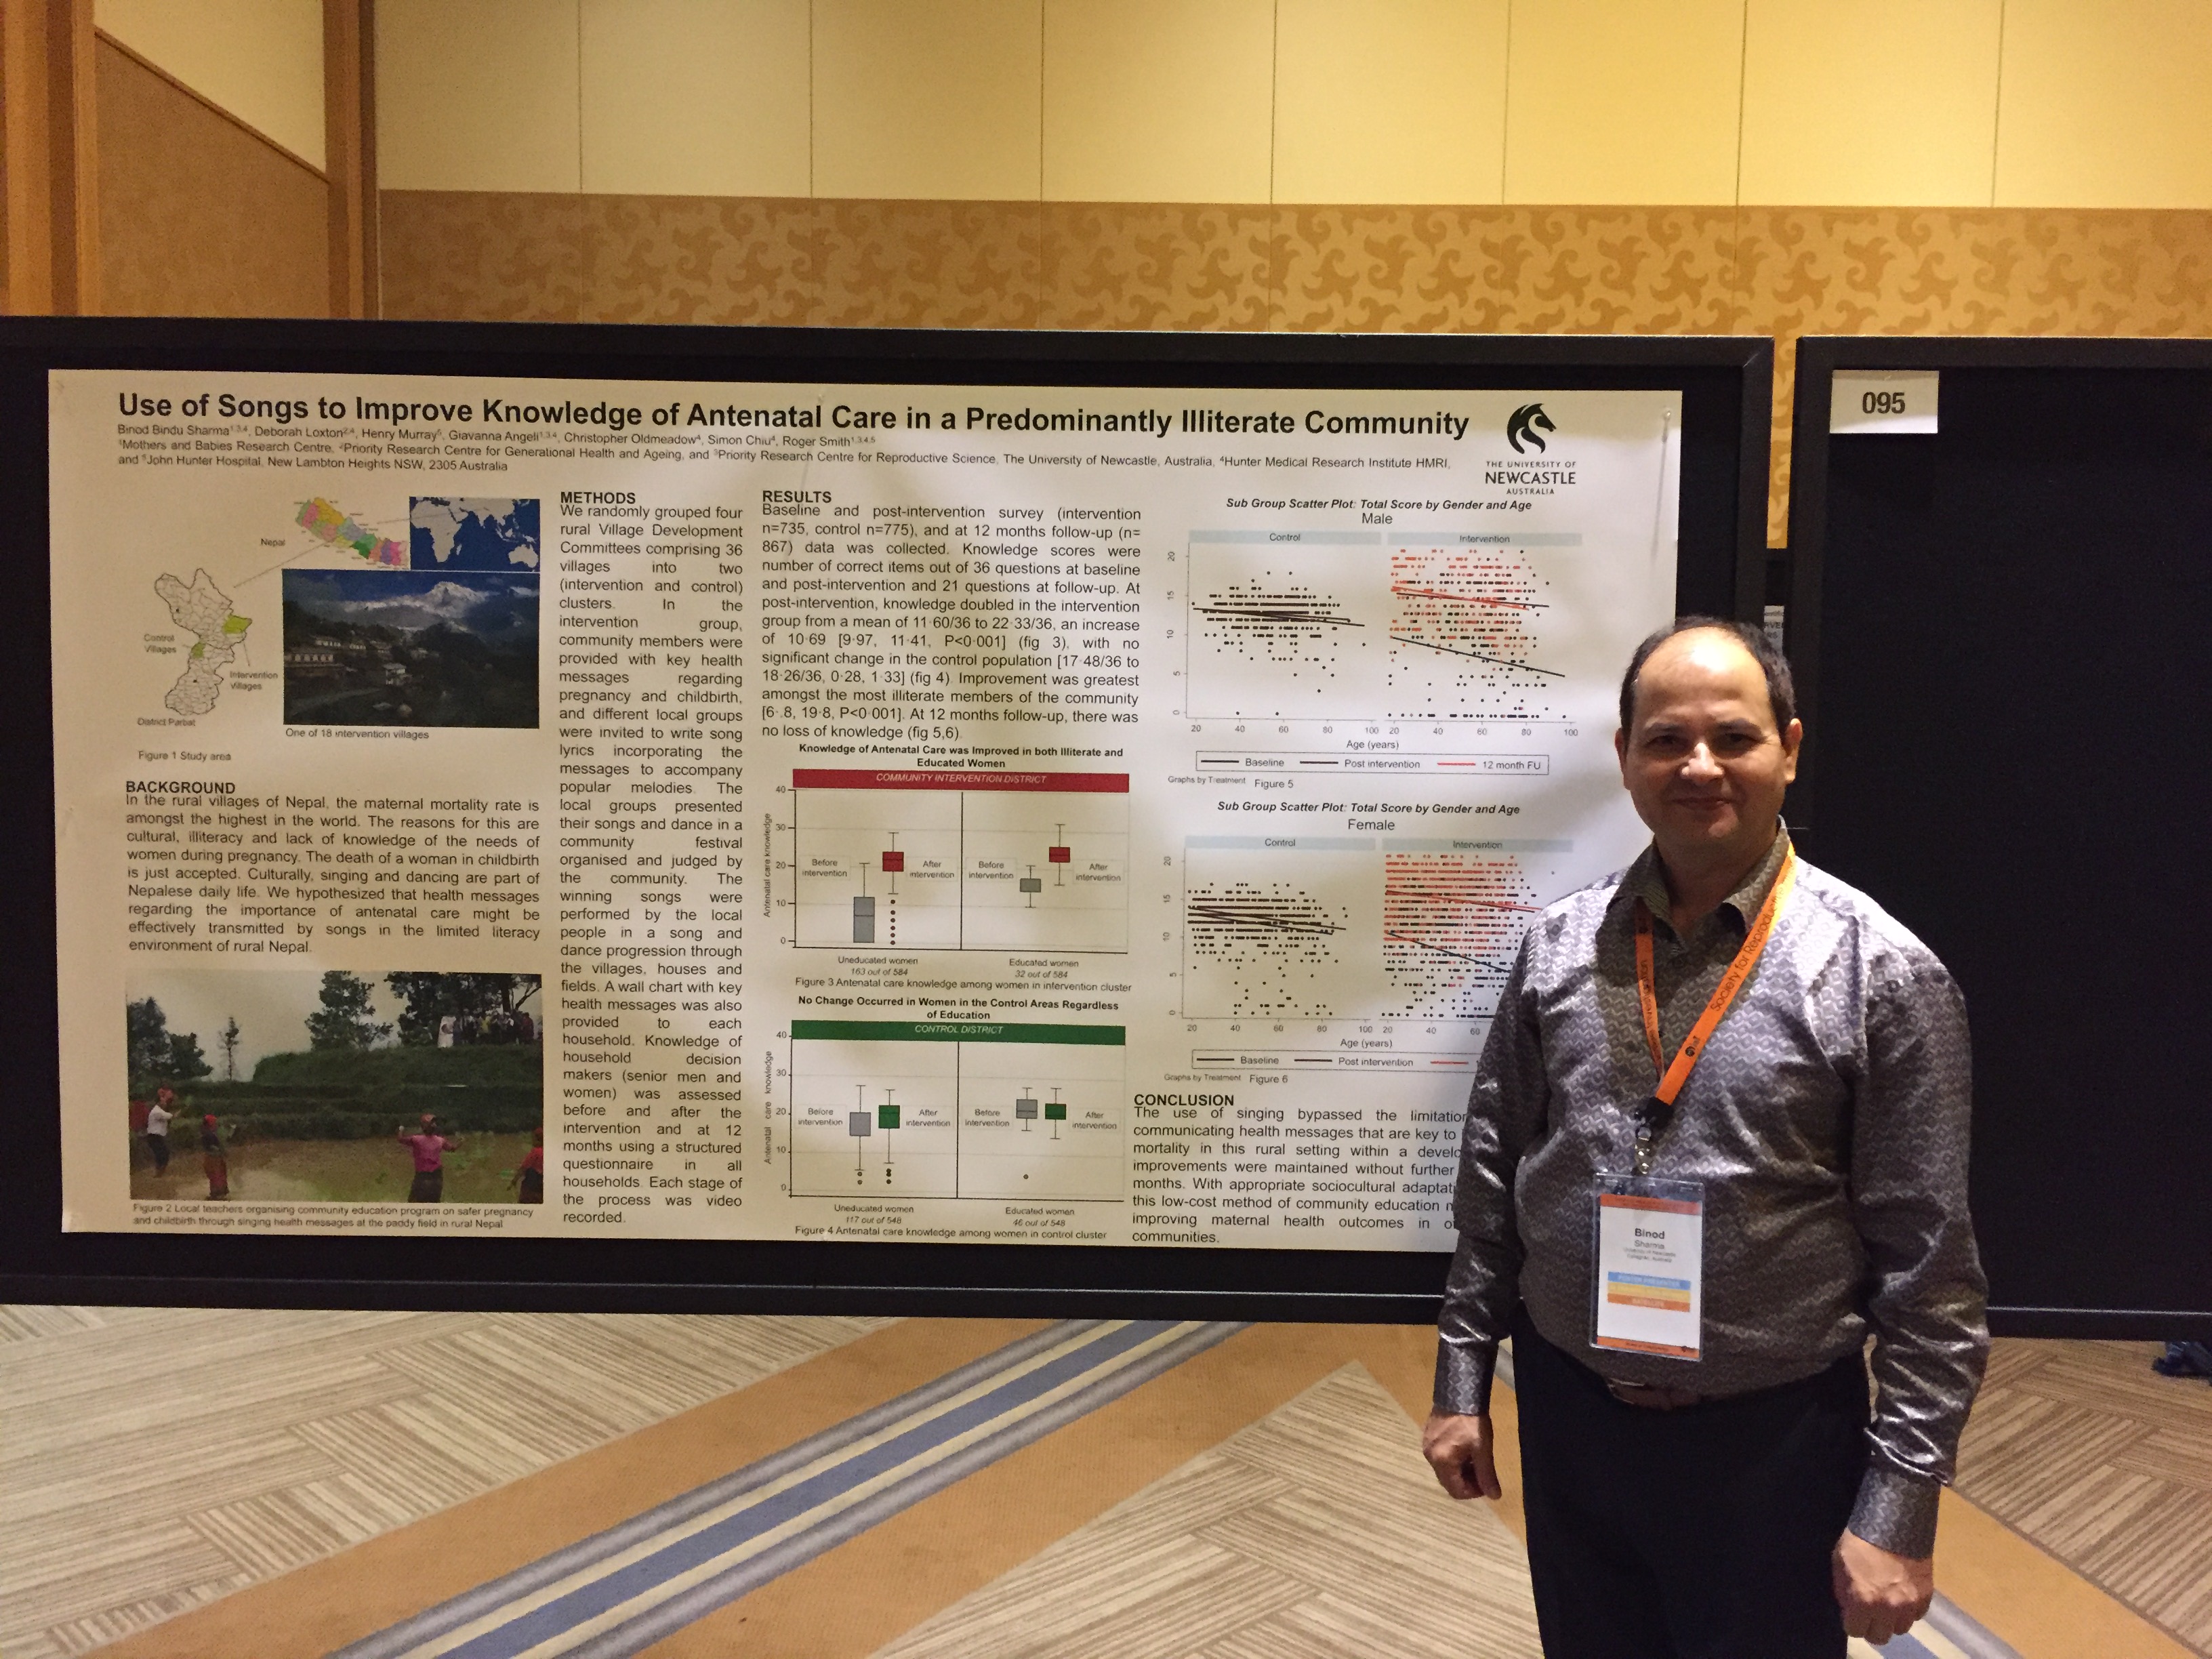 Attended and presented the research findings at the 65th Annual Scientific Meeting of the Society for Reproductive Investigation (SRI) (March 7-10) Hilton, San Diego, the USA.